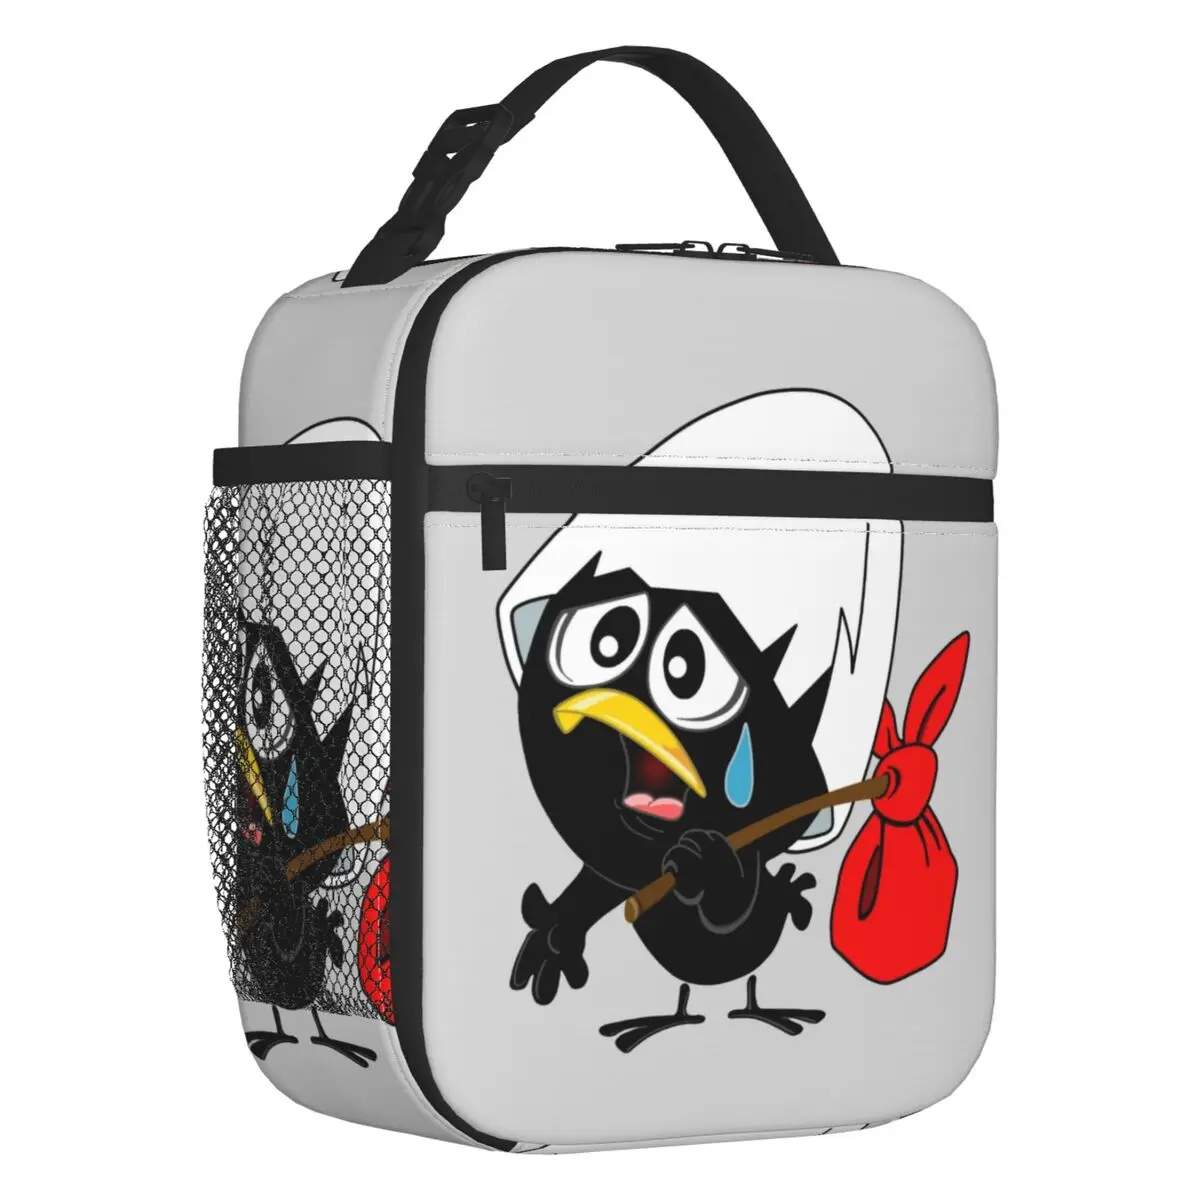 

Sad Black Chicken Calimero Portable Lunch Boxes for Women Comic Cartoon Thermal Cooler Food Insulated Lunch Bag Kids Children